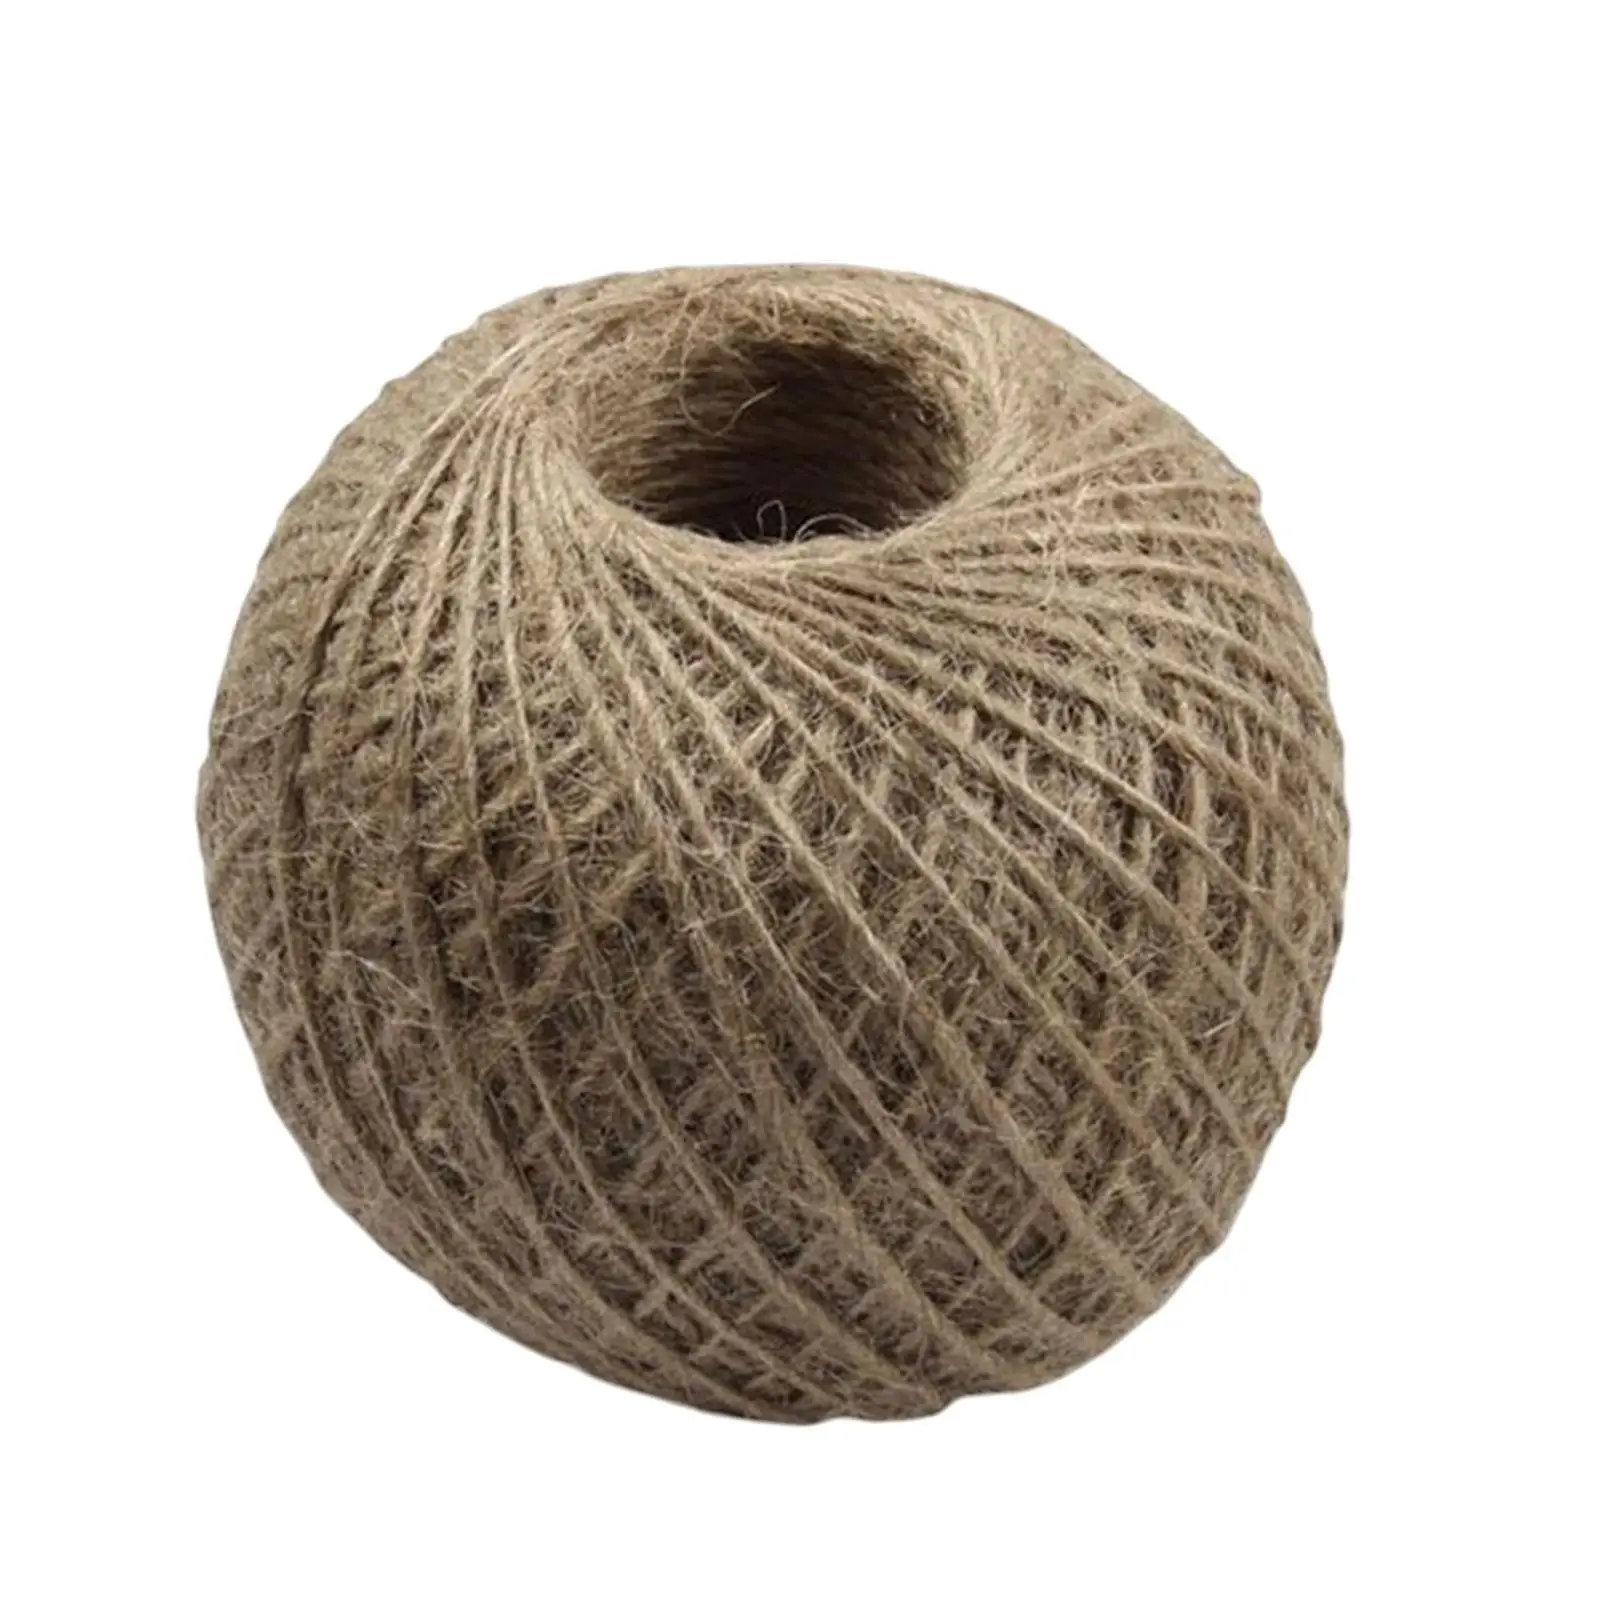 

Gift Wrapping Twine Rustic Weaving Rope 262 ft Hemp Rope for Arts Craft Plant Hanger Gift Tags Decorative Projects Home Decor